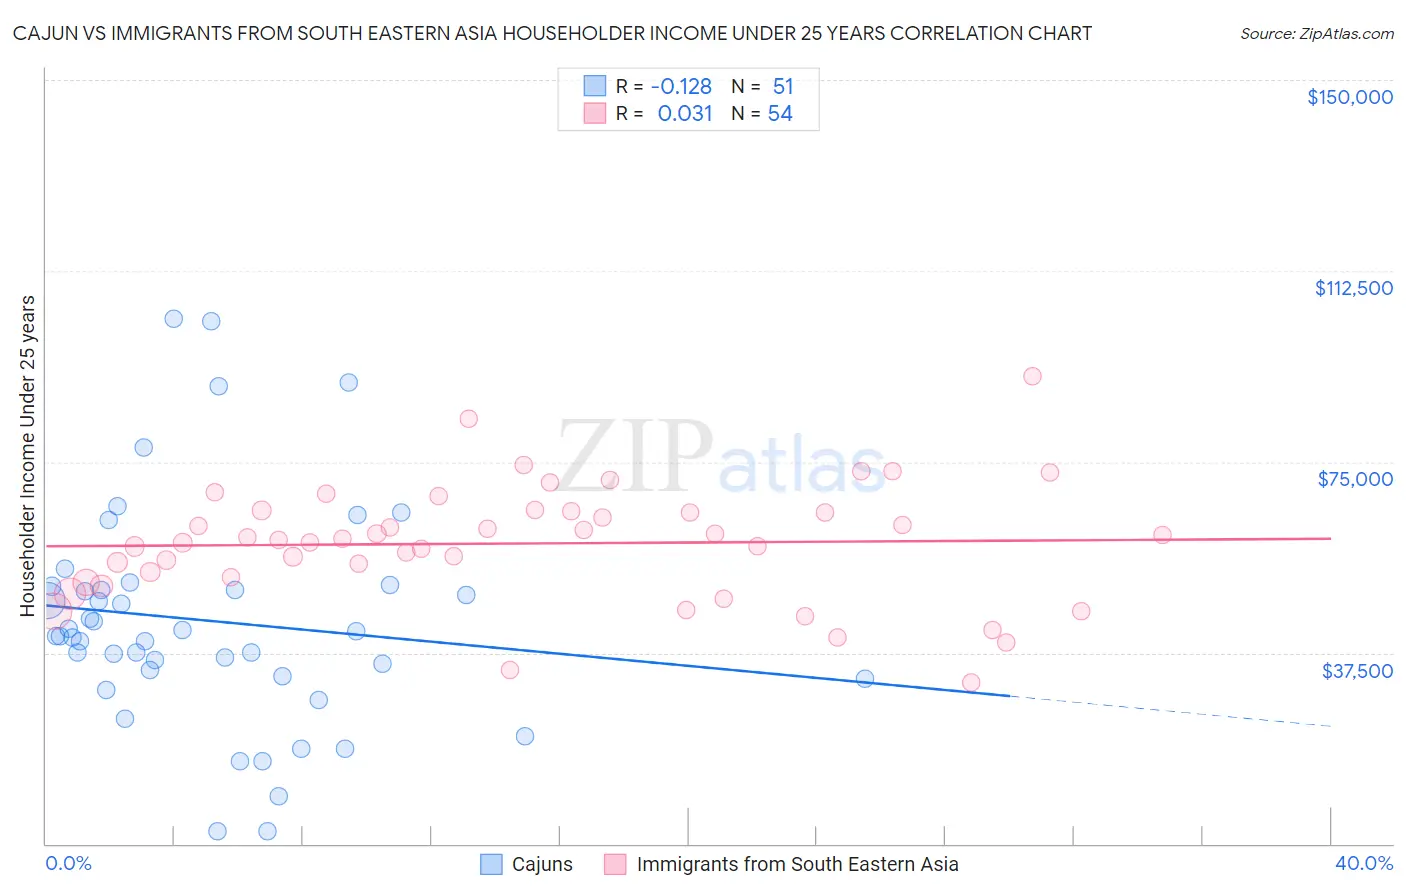 Cajun vs Immigrants from South Eastern Asia Householder Income Under 25 years